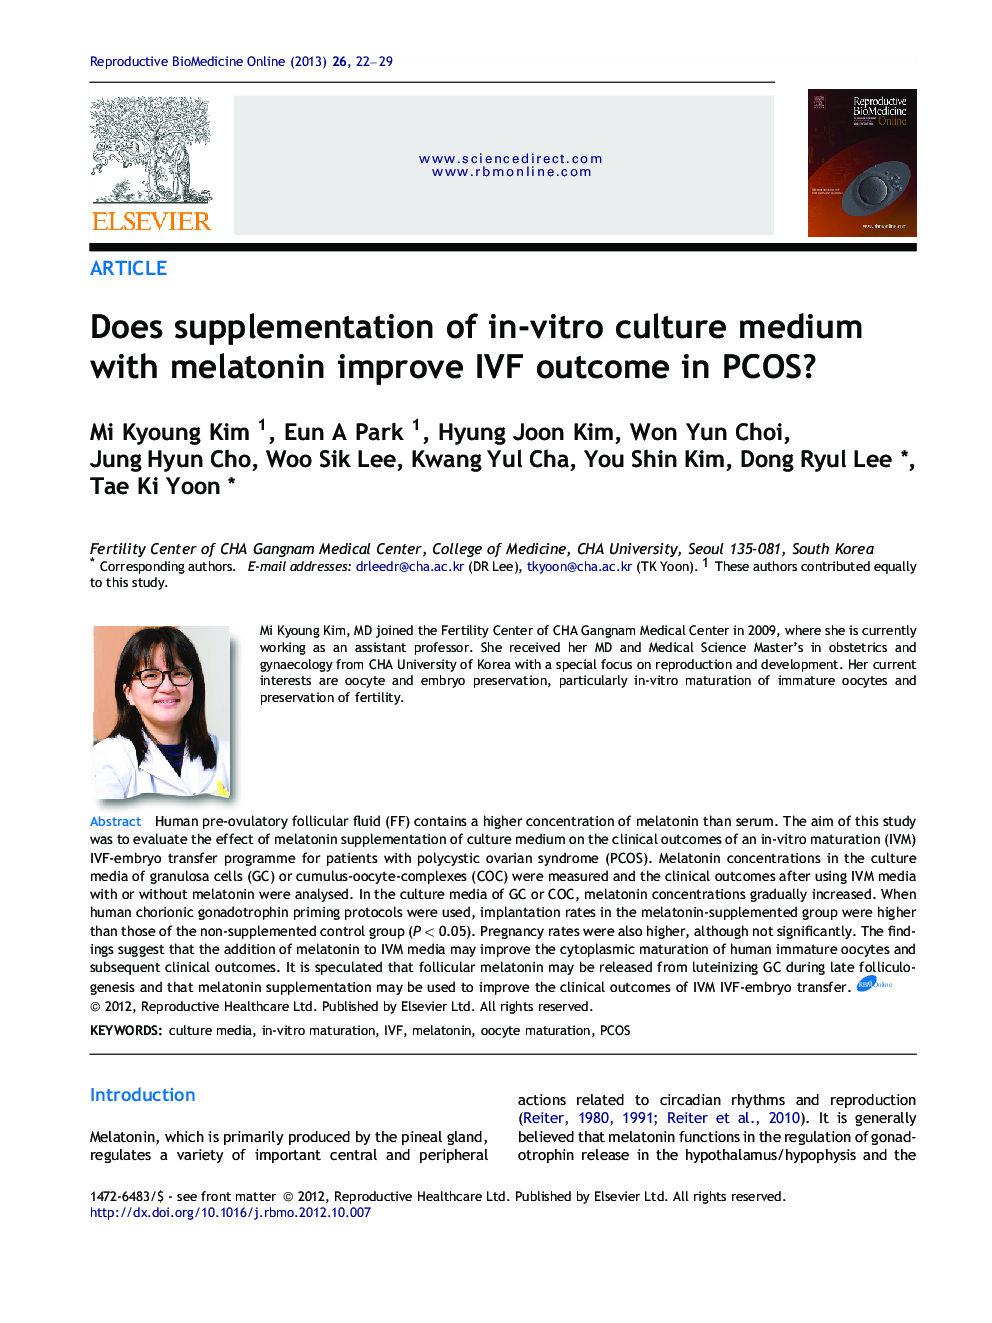 Does supplementation of in-vitro culture medium with melatonin improve IVF outcome in PCOS? 